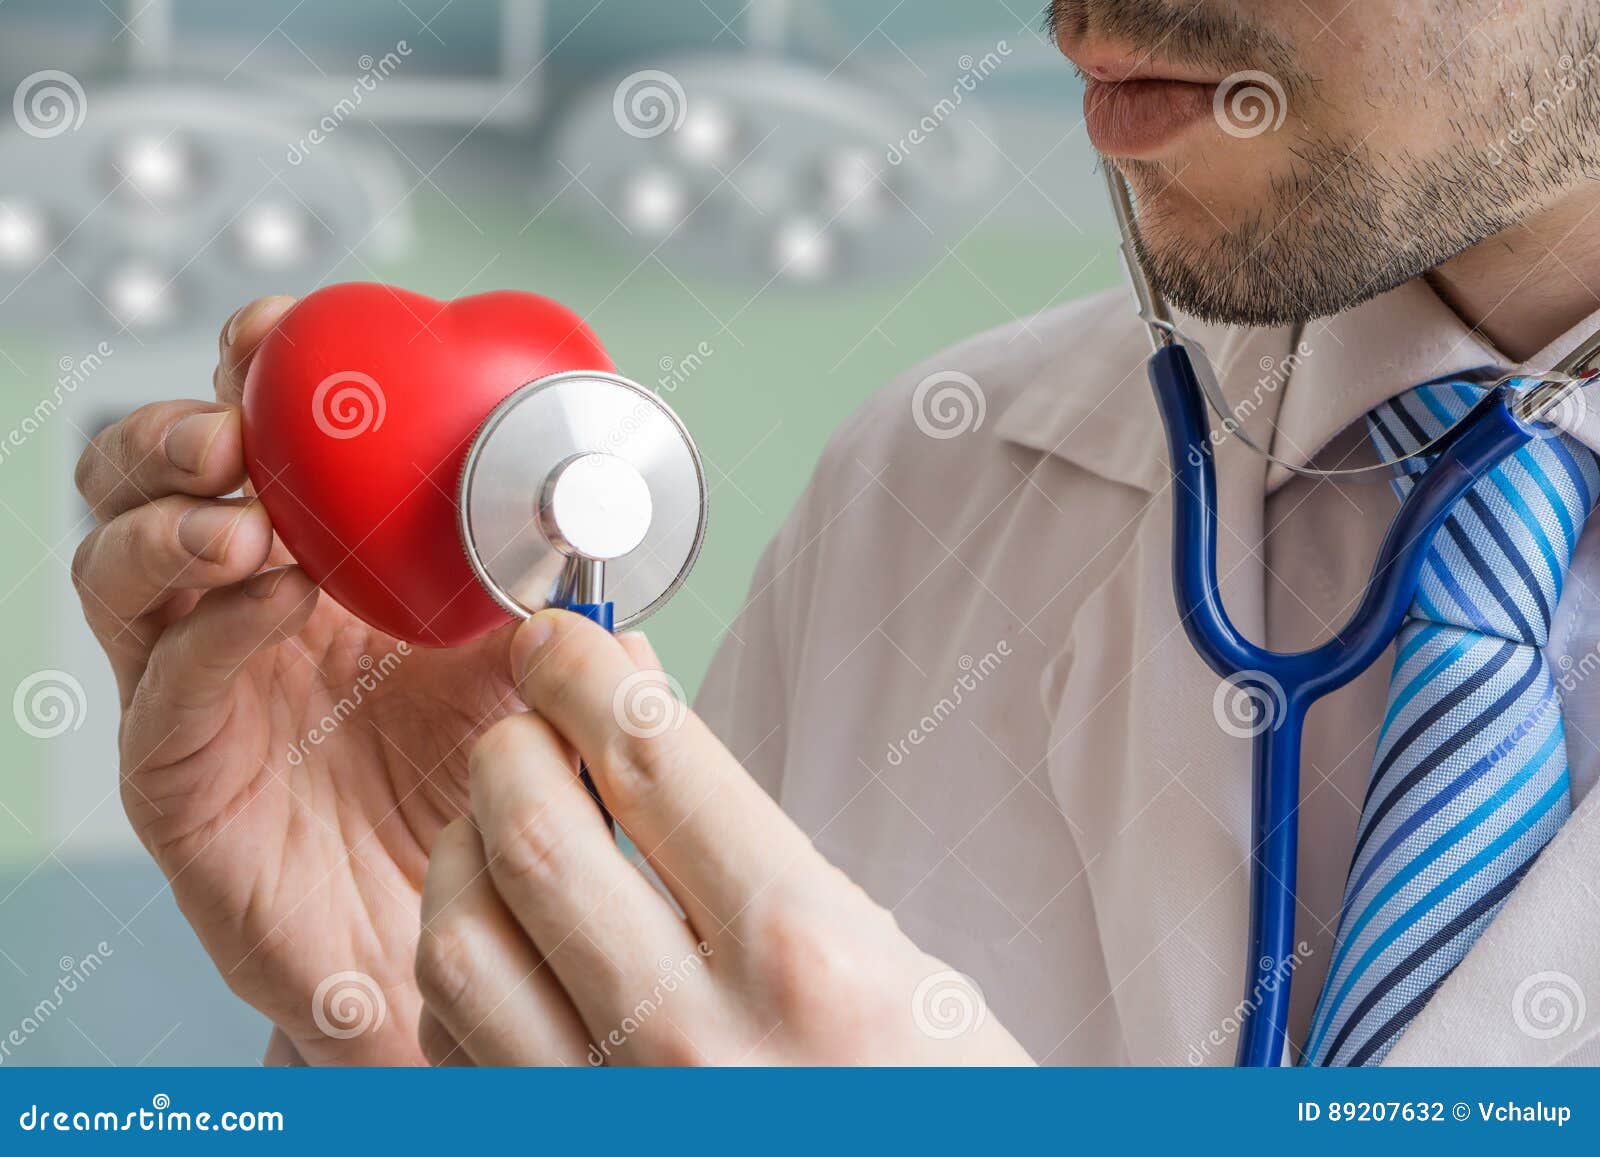 cardiologist doctor is listening red heart with stethoscope